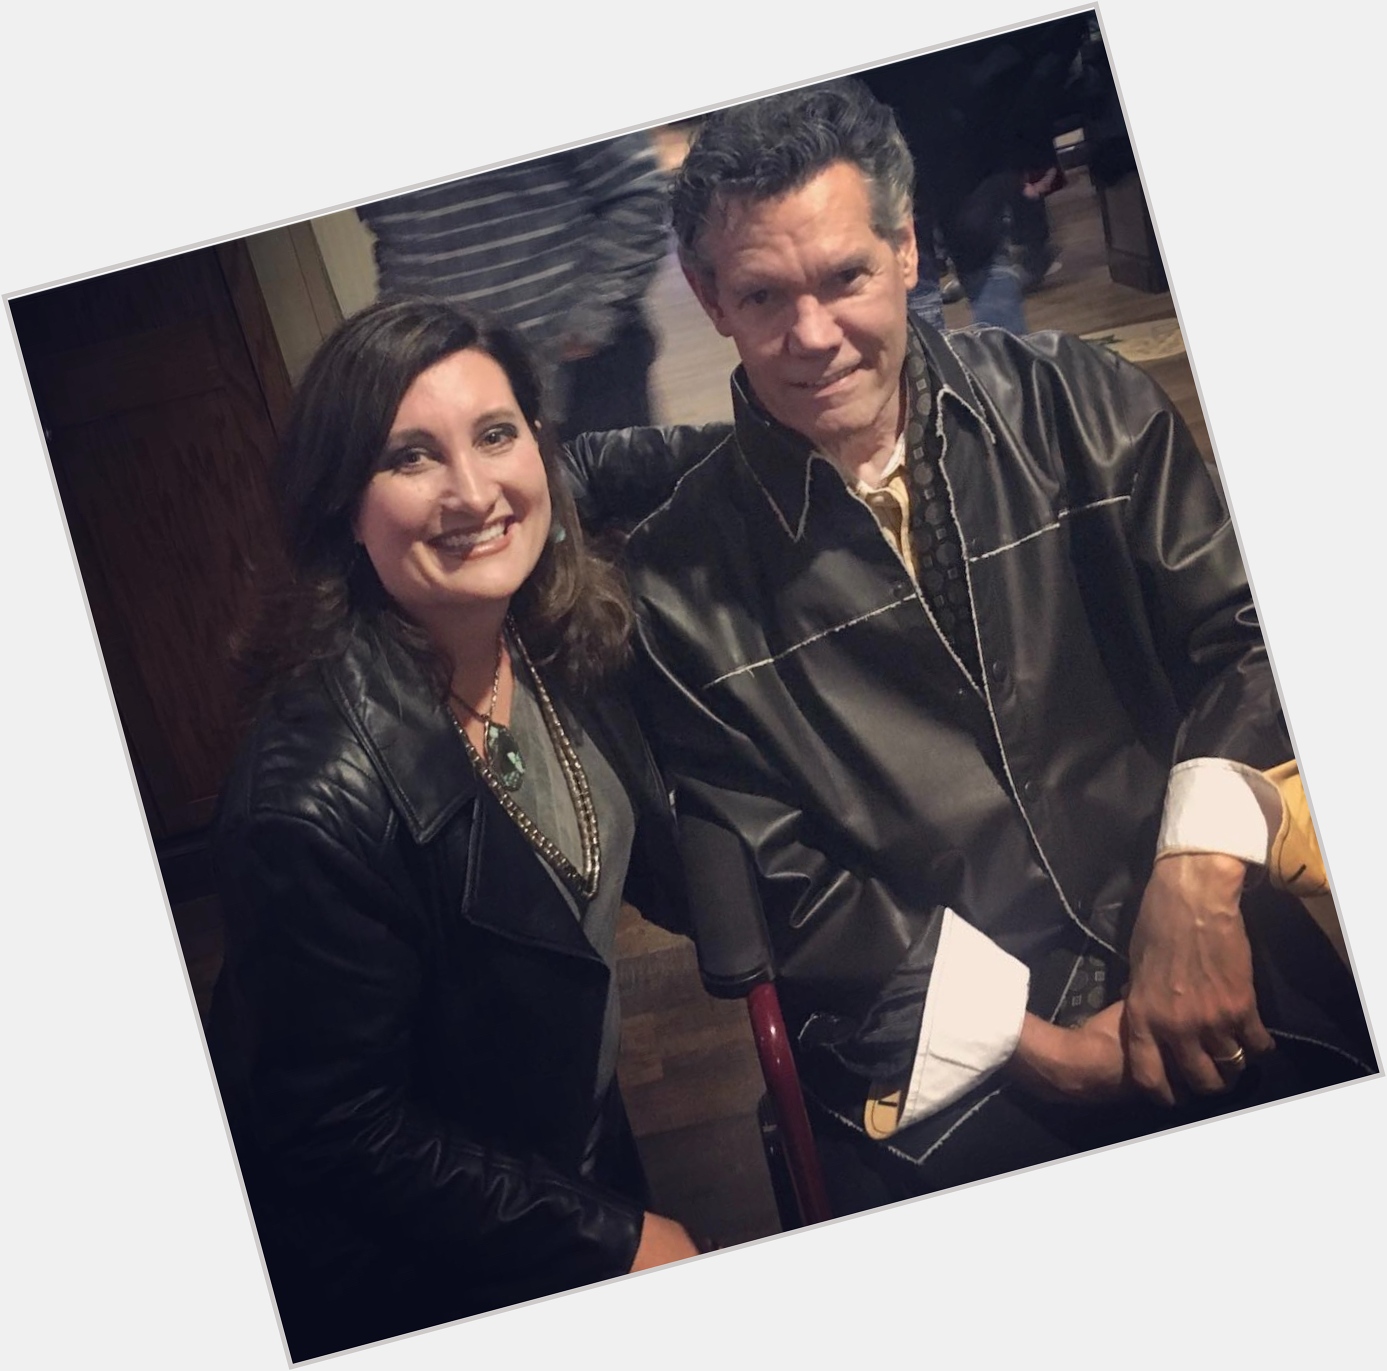 Happy Birthday to Randy Travis! I ran into him a few years back at the Opry, and what a kind soul! 